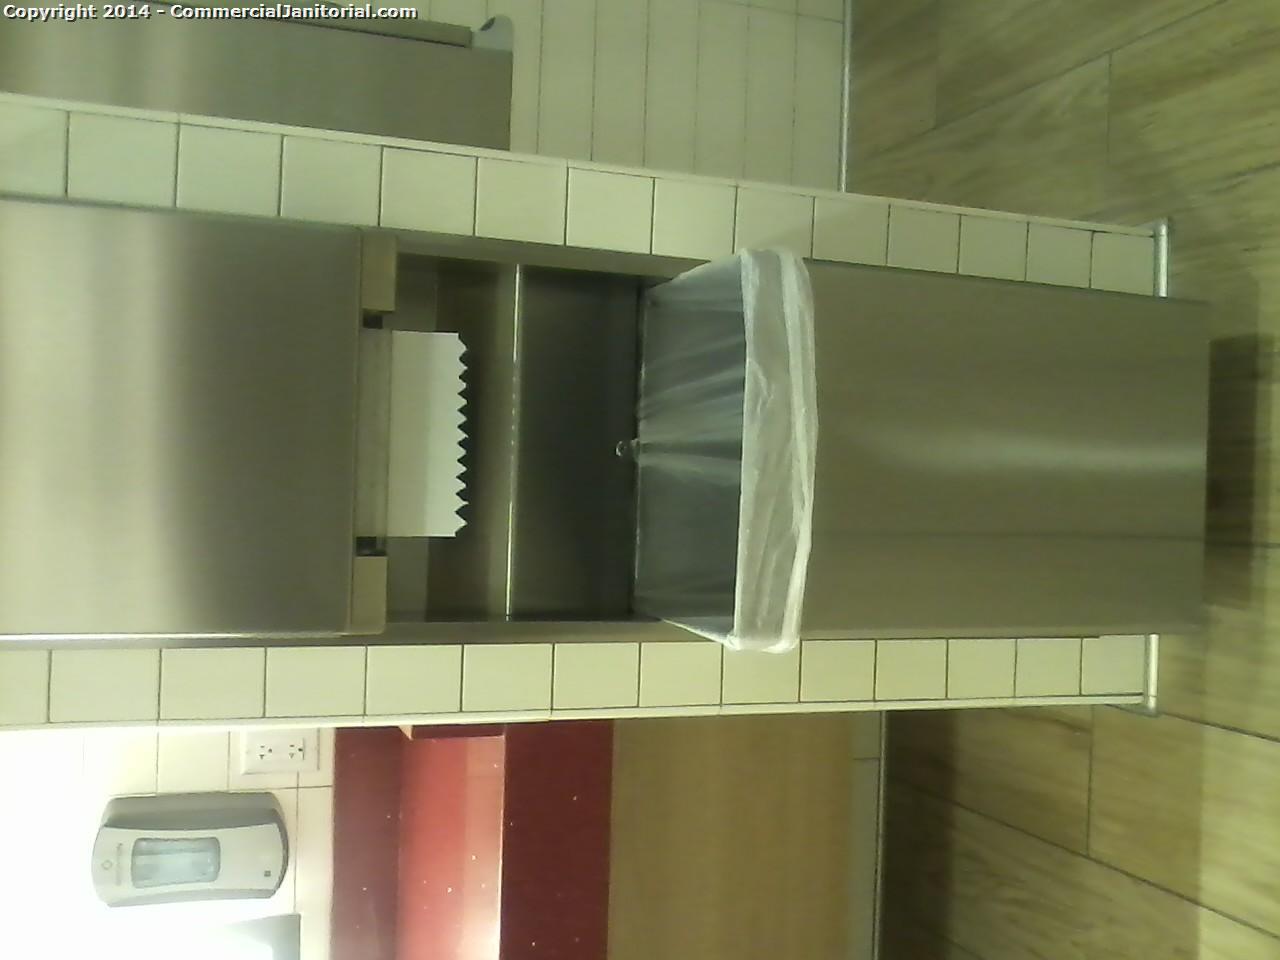 Towel paper dispenser has been cleaned outside of it 